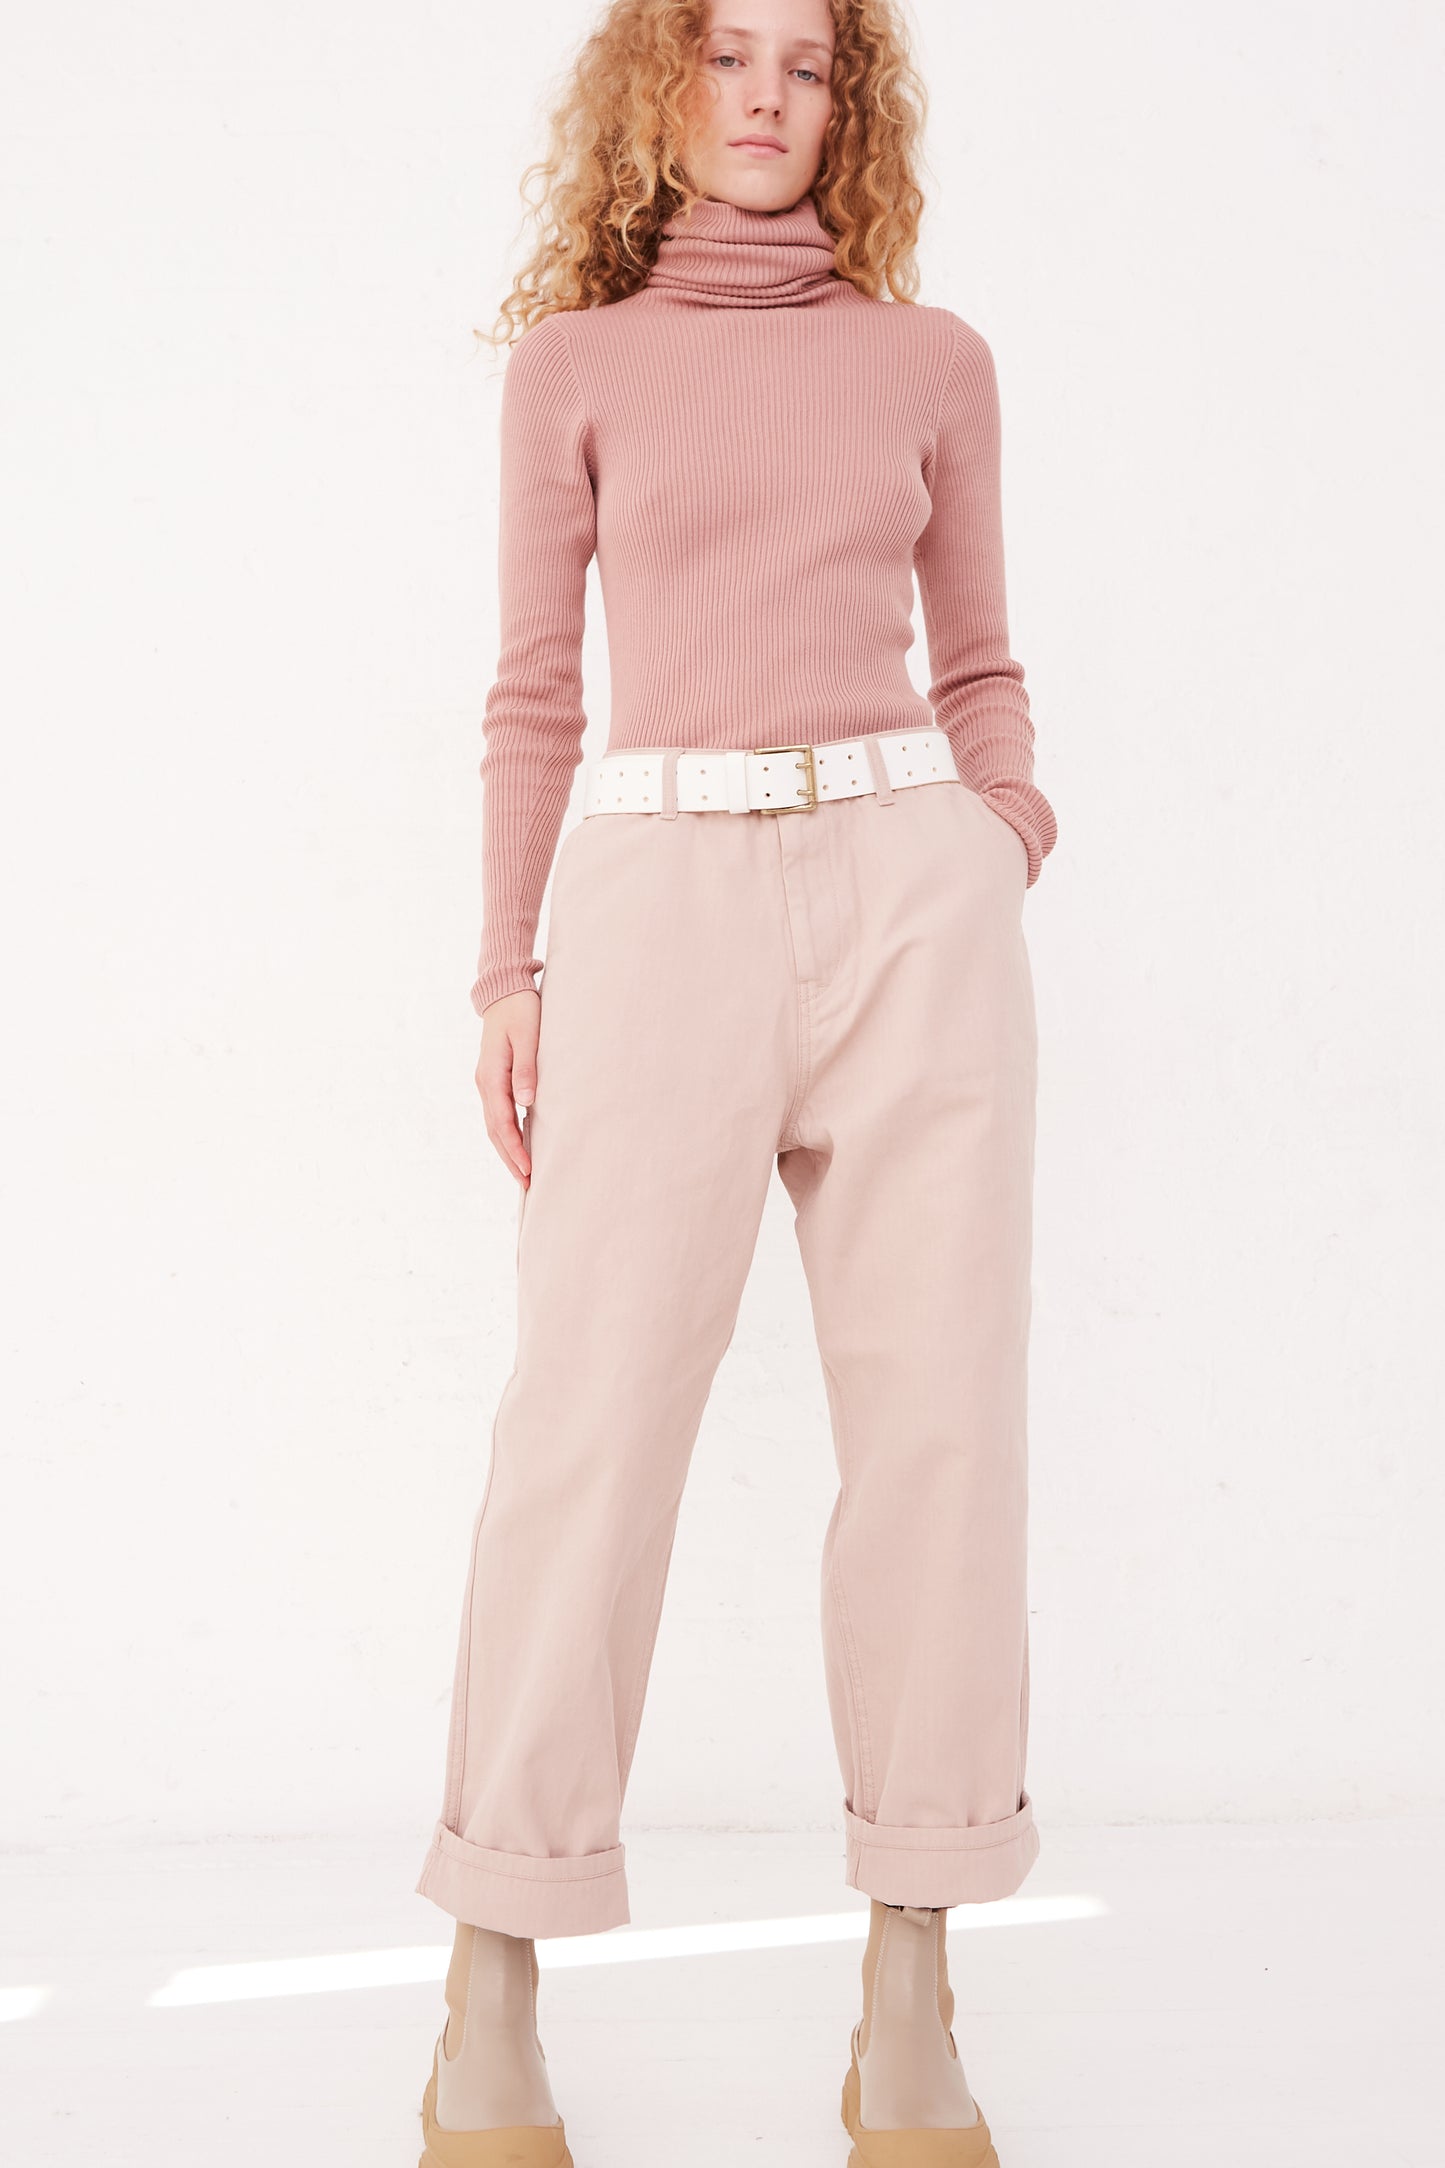 The model is wearing a relaxed fit, wide leg Herringbone Pants in Pink and Ichi Antiquités turtle neck sweater.